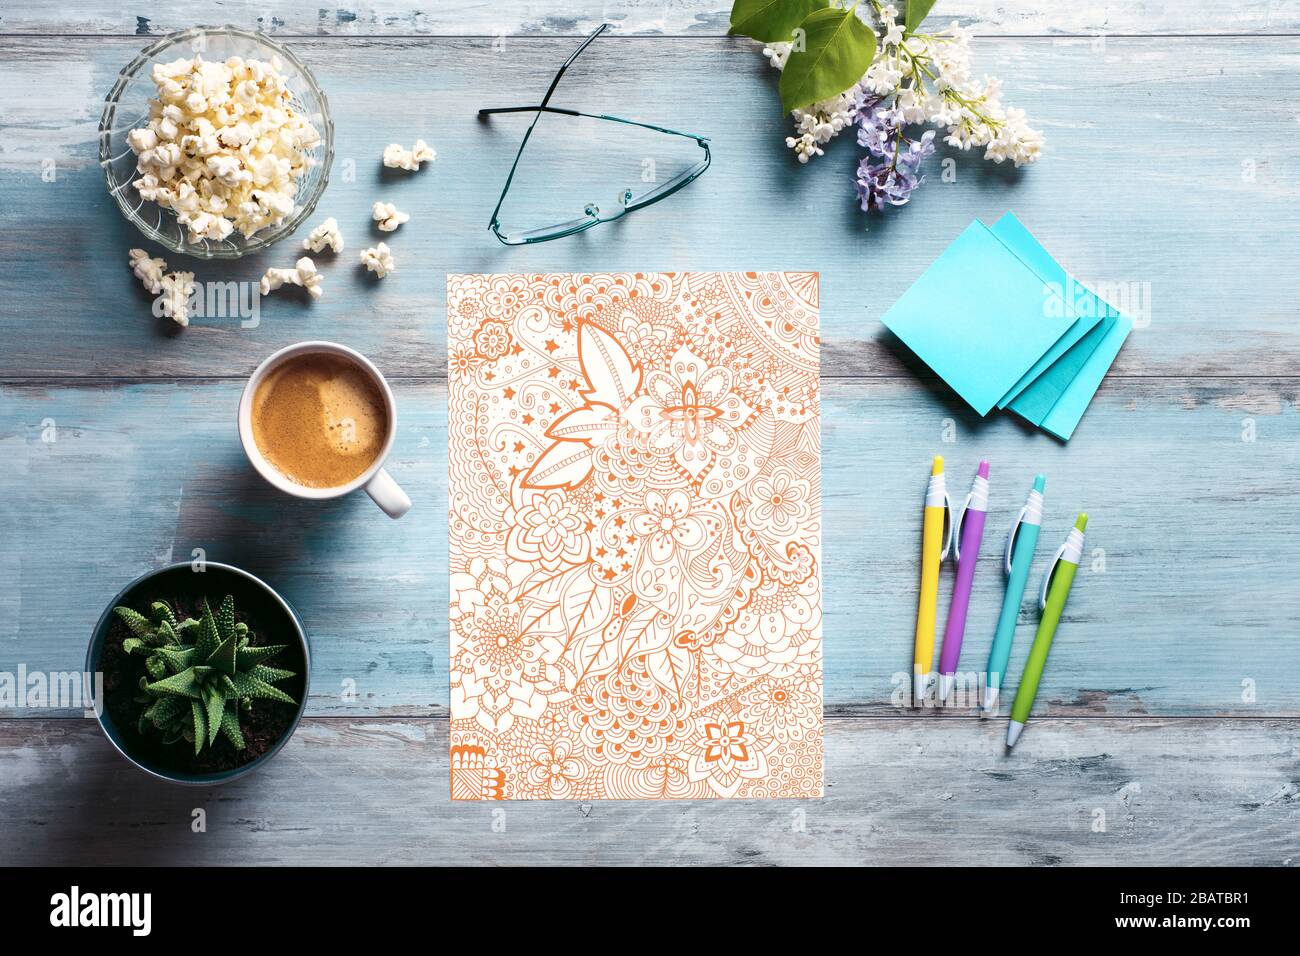 Adult coloring book, stress relieving trend. Flat lay art therapy, mental health, creativity and mindfulness concept. Stock Photo